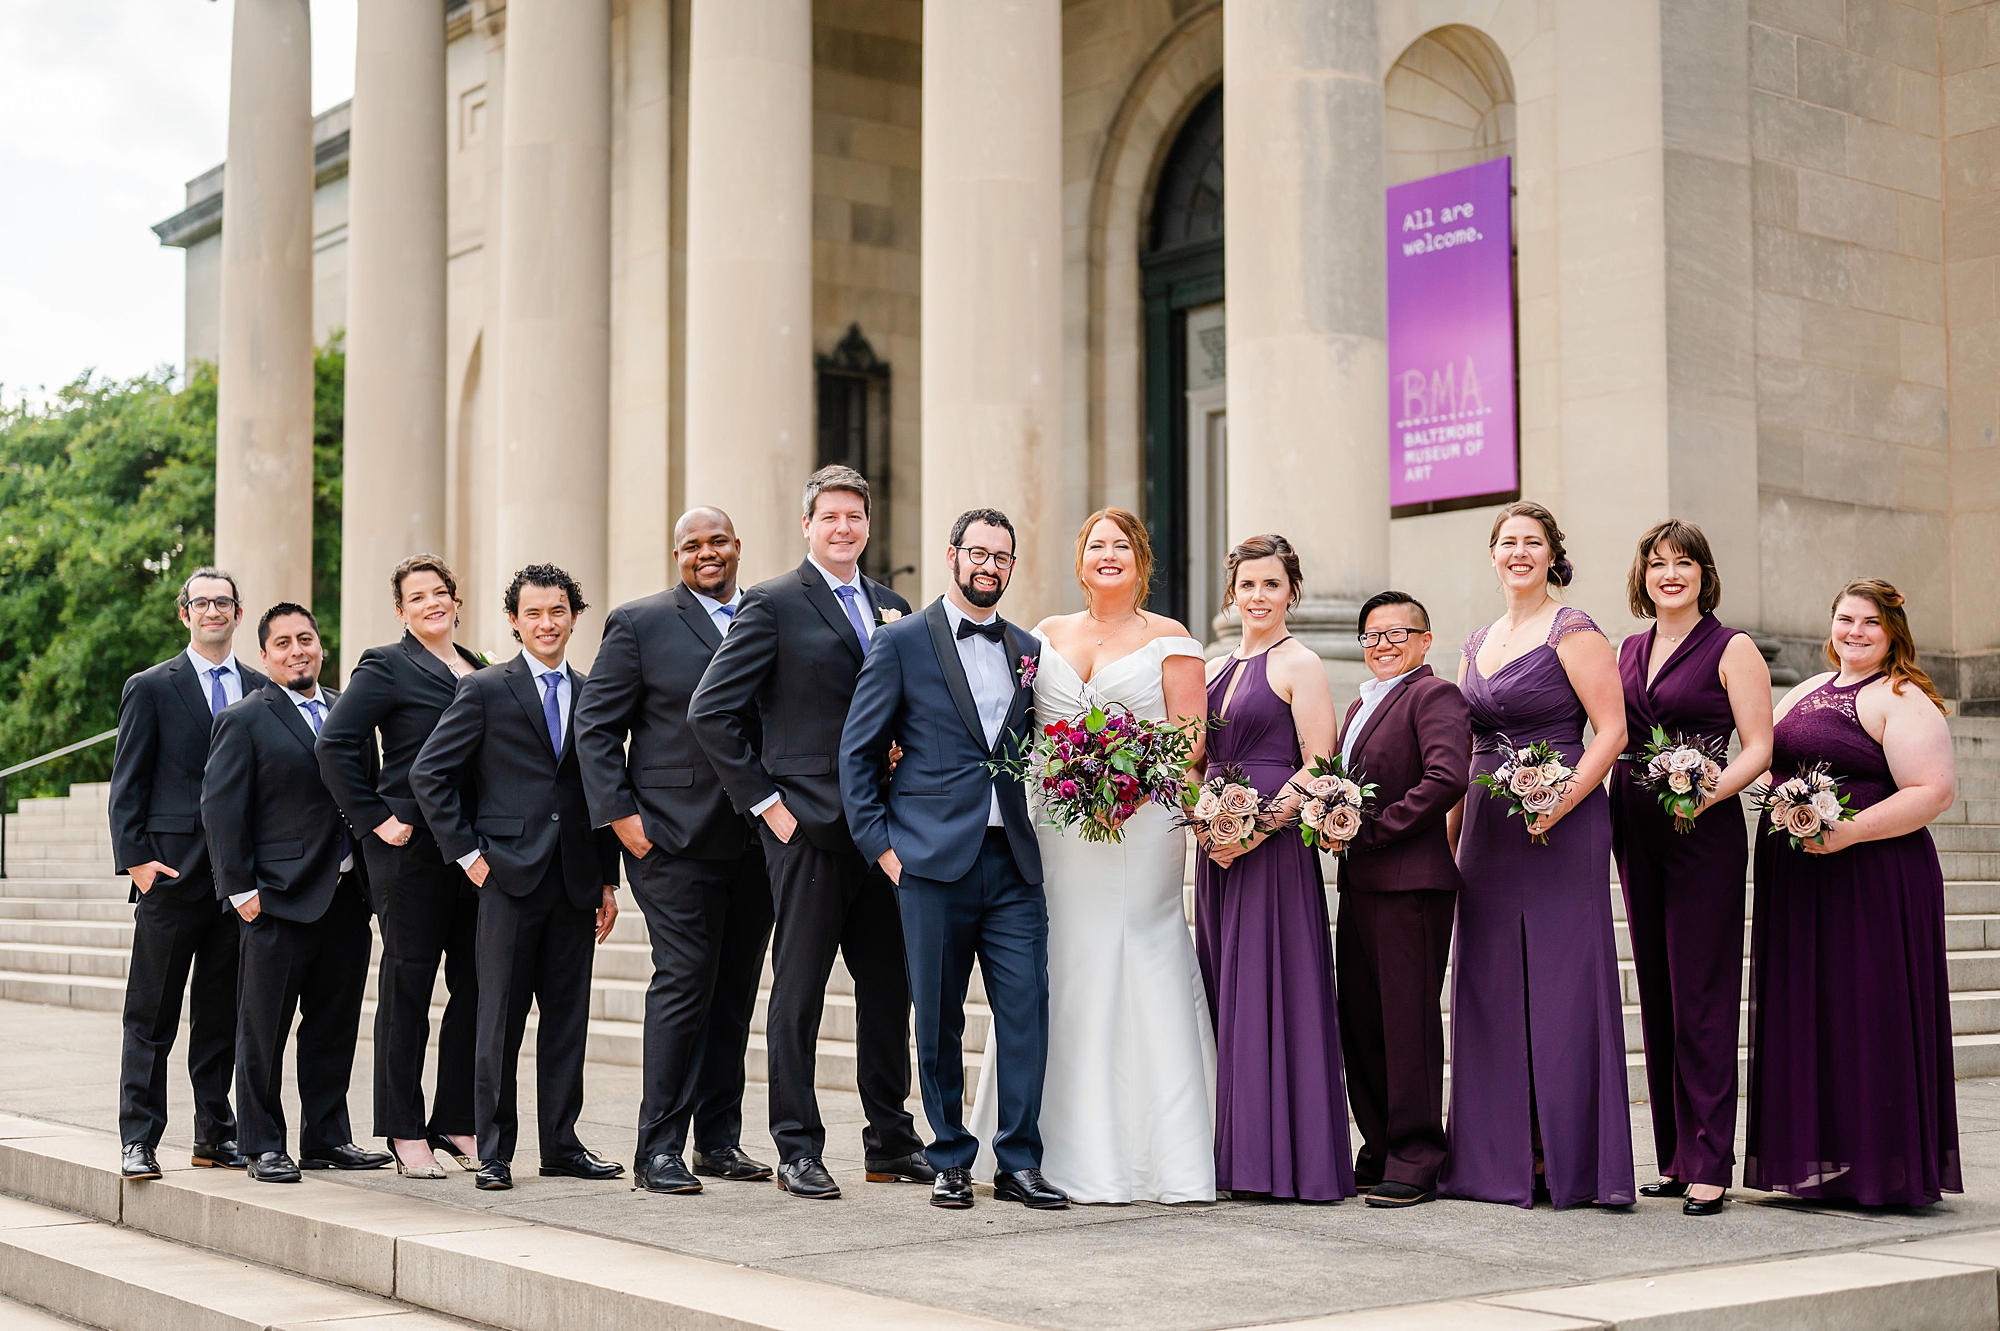 bride and groom pose with wedding party in plum and navy attire 